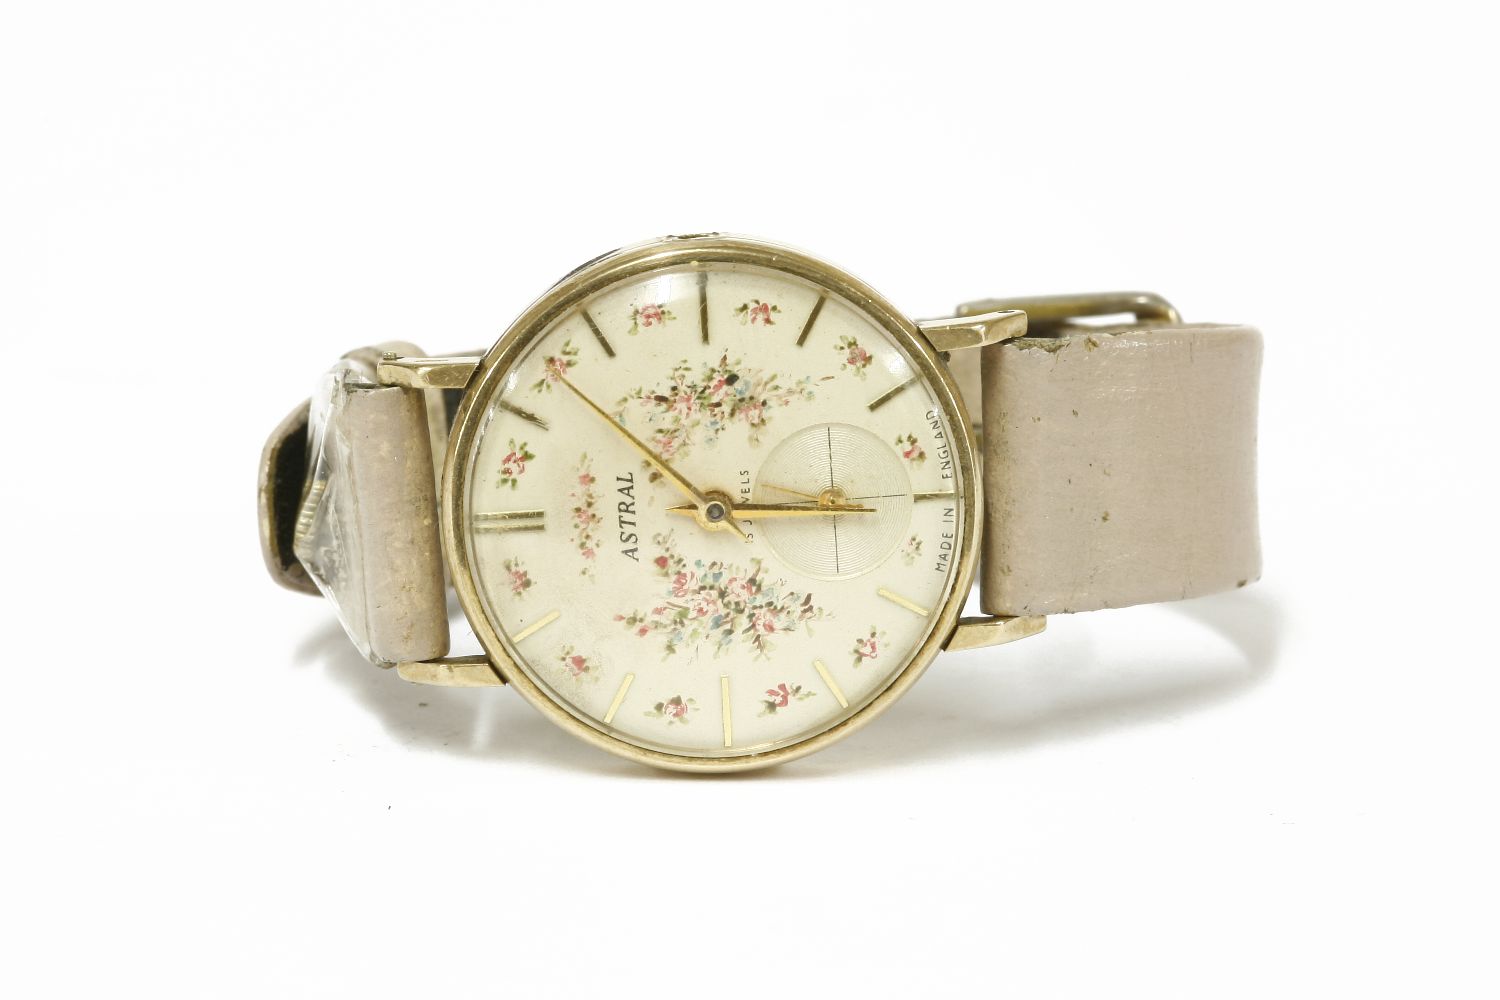 A gentlemen's 9ct gold Astral mechanical strap watch, cream dial with floral print and baton makers,